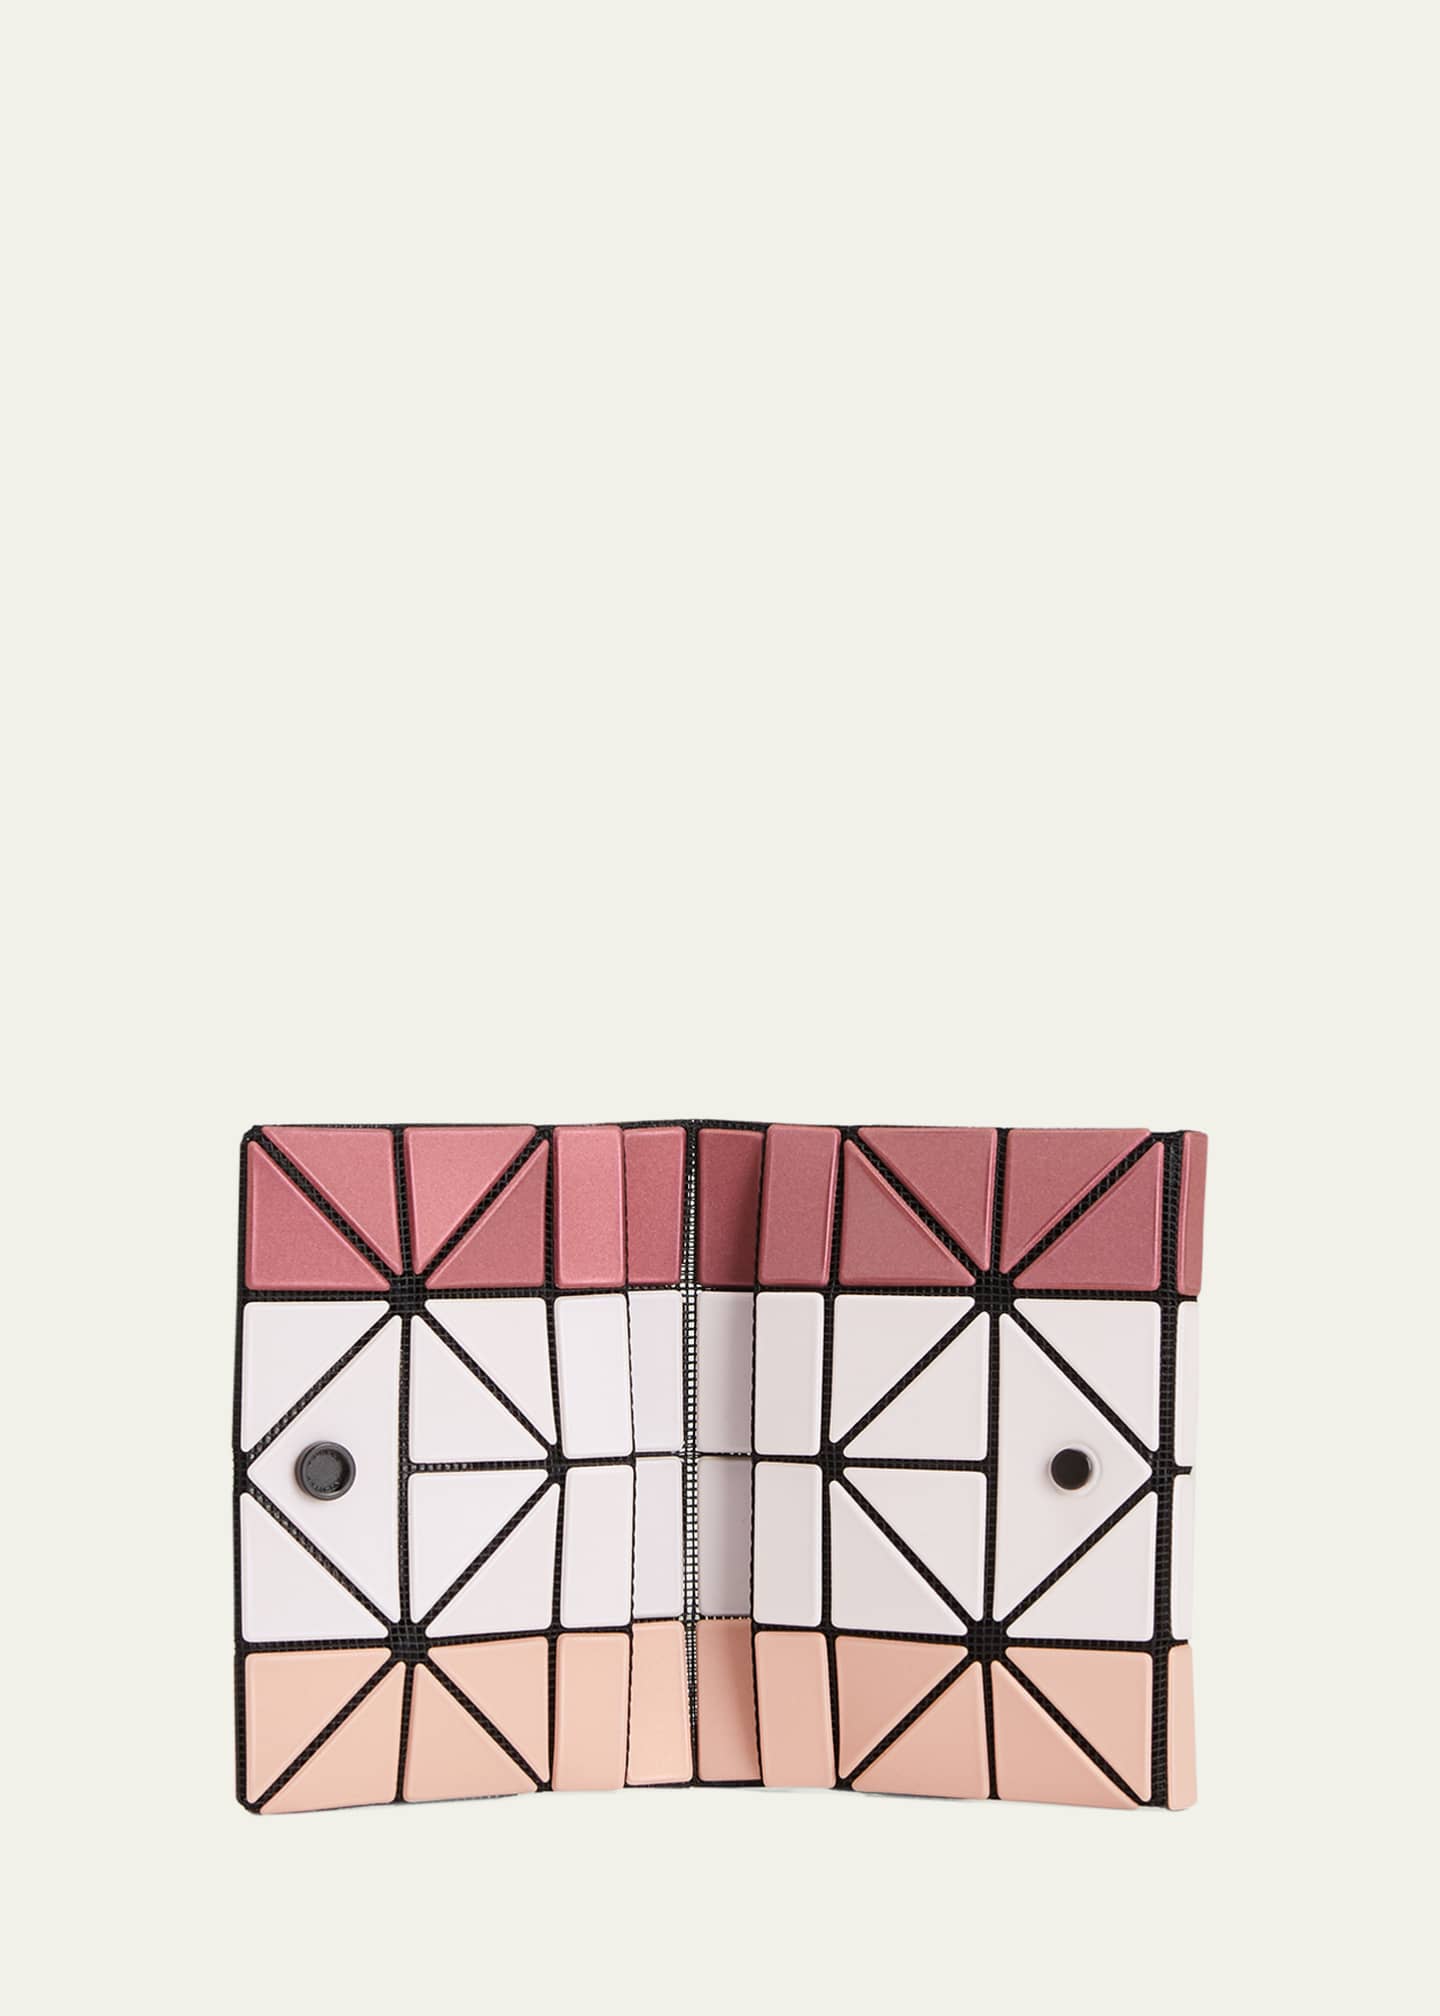 Bao Bao Issey Miyake Bags - Pouch - Wallets - Card Cases